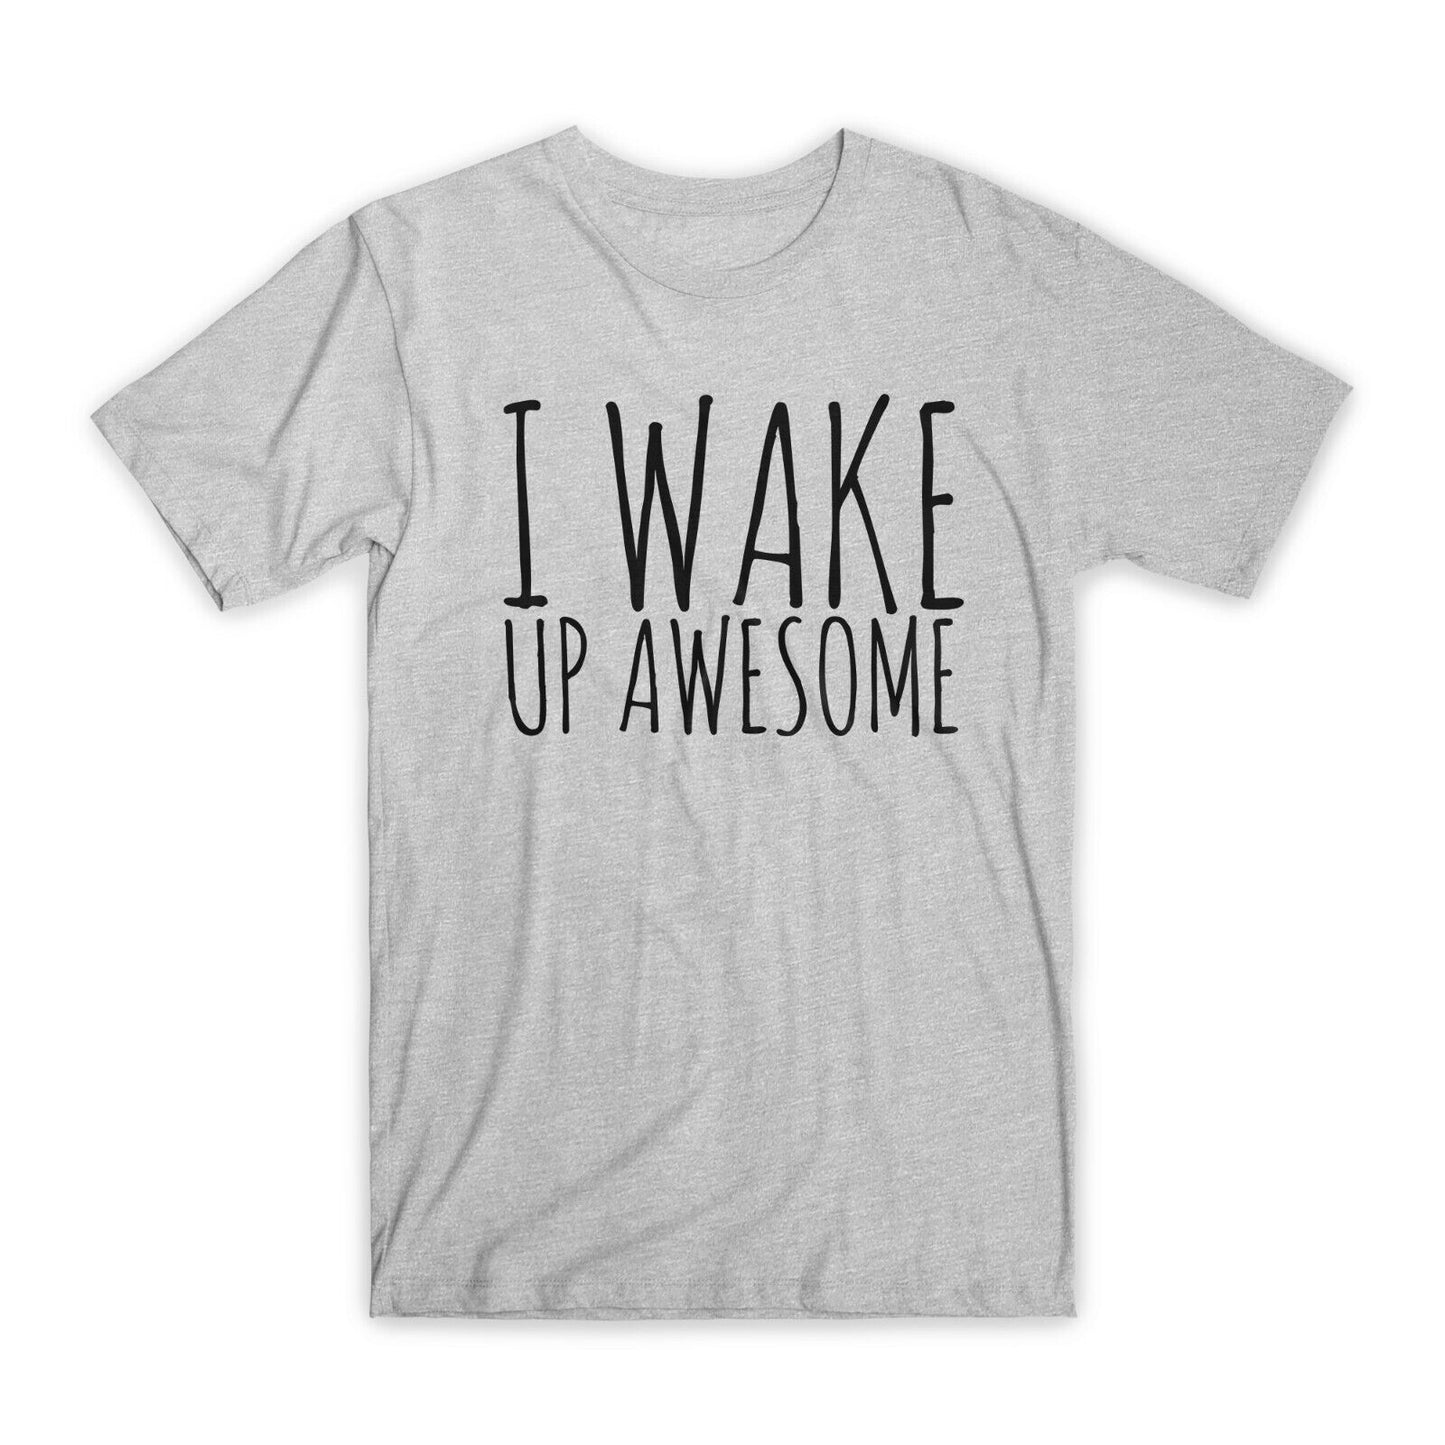 I Wake Up Awesome Print T-Shirt Premium Soft Cotton Crew Neck Funny Tee Gift NEW